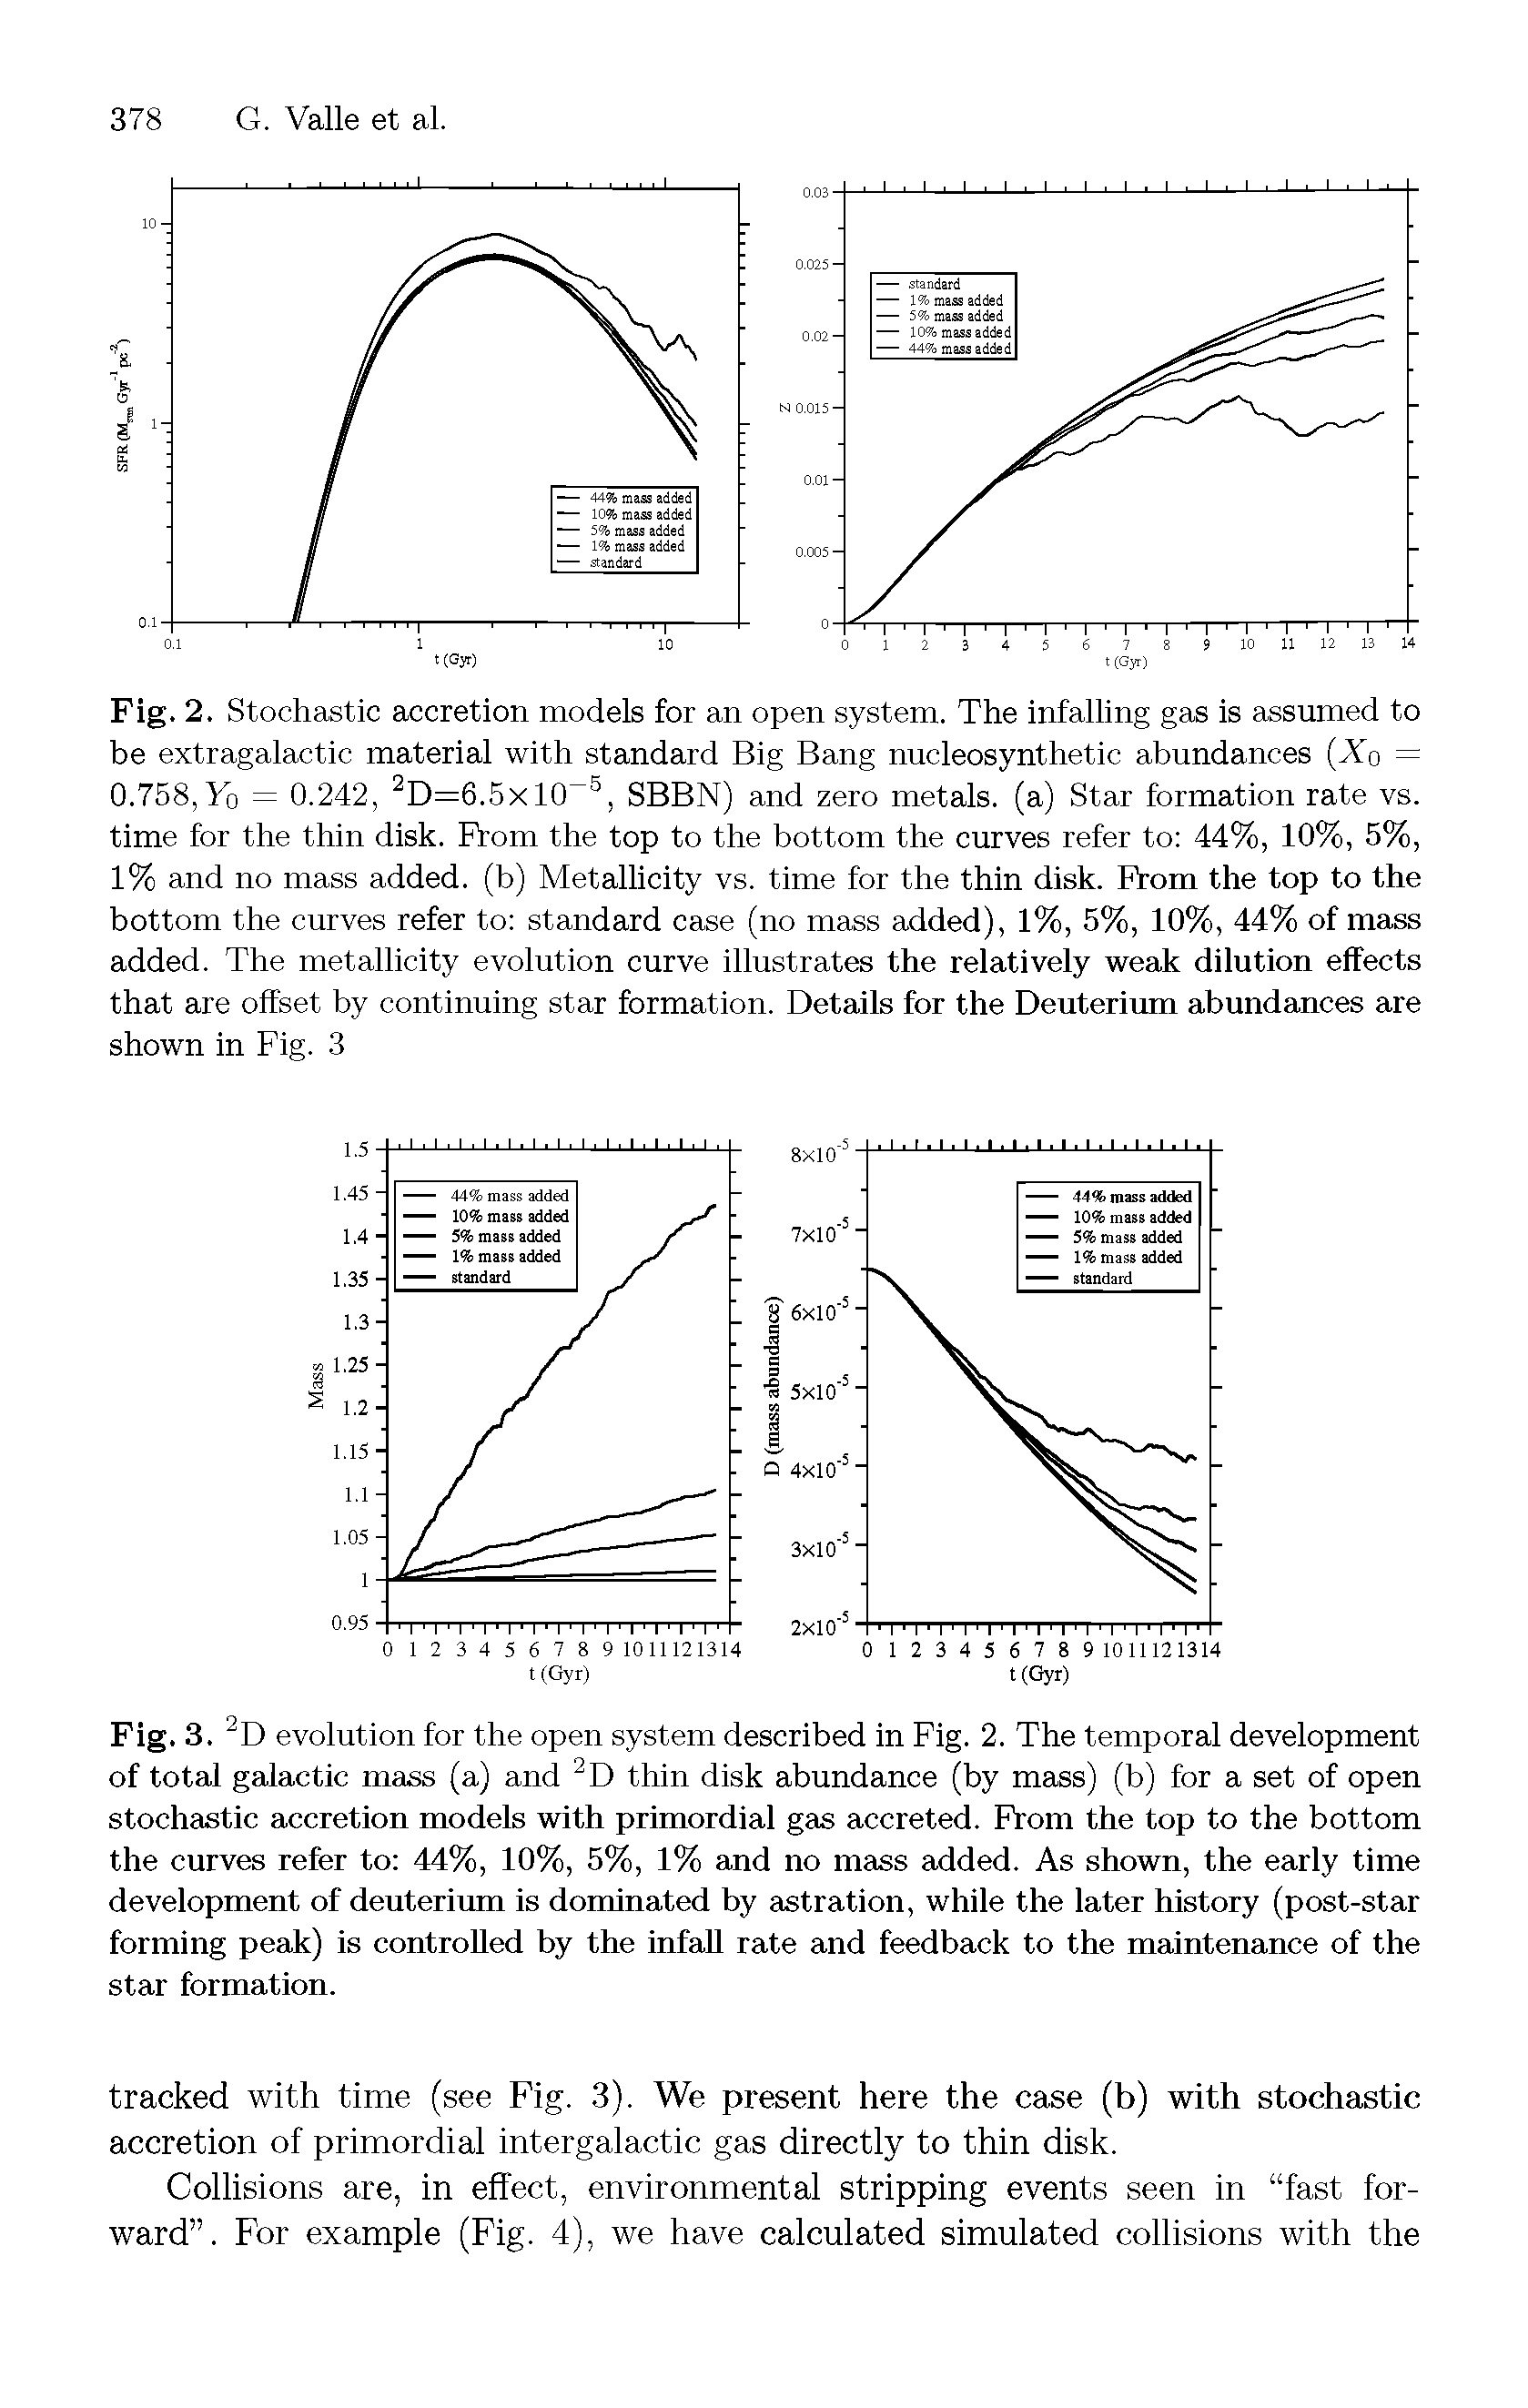 Fig. 2. Stochastic accretion models for an open system. The infalling gas is assumed to be extragalactic material with standard Big Bang nucleosynthetic abundances (Xo = 0.758, Yo = 0.242, 2D=6.5xlCP5, SBBN) and zero metals, (a) Star formation rate vs. time for the thin disk. From the top to the bottom the curves refer to 44%, 10%, 5%, 1% and no mass added, (b) Metallicity vs. time for the thin disk. From the top to the bottom the curves refer to standard case (no mass added), 1%, 5%, 10%, 44% of mass added. The metallicity evolution curve illustrates the relatively weak dilution effects that are offset by continuing star formation. Details for the Deuterium abundances are shown in Fig. 3...